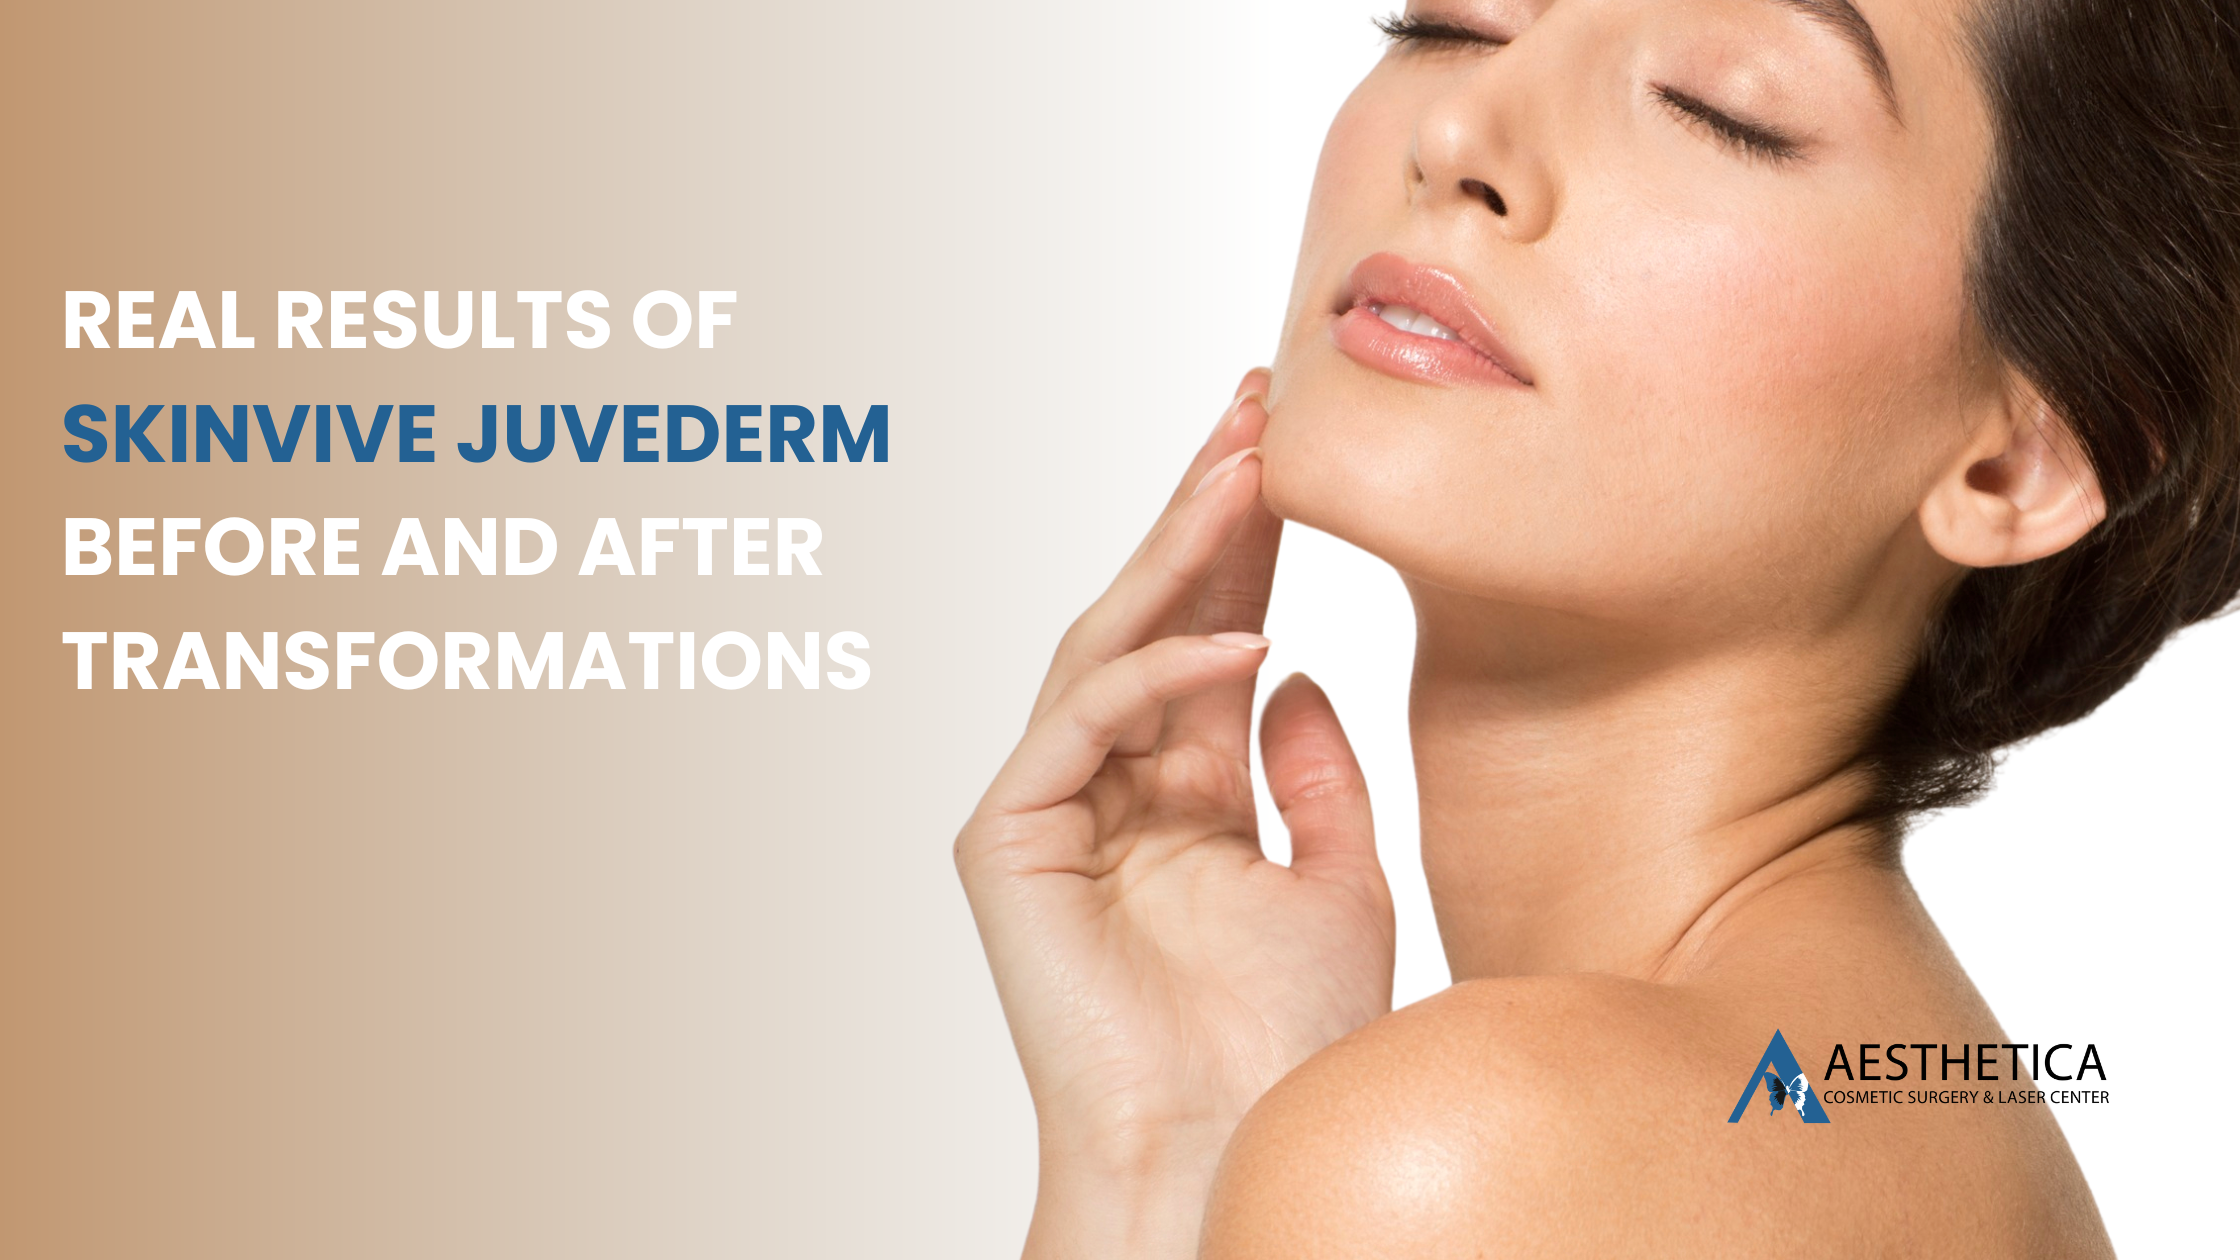 Real Results of Skinvive Juvederm Before and After Transformations